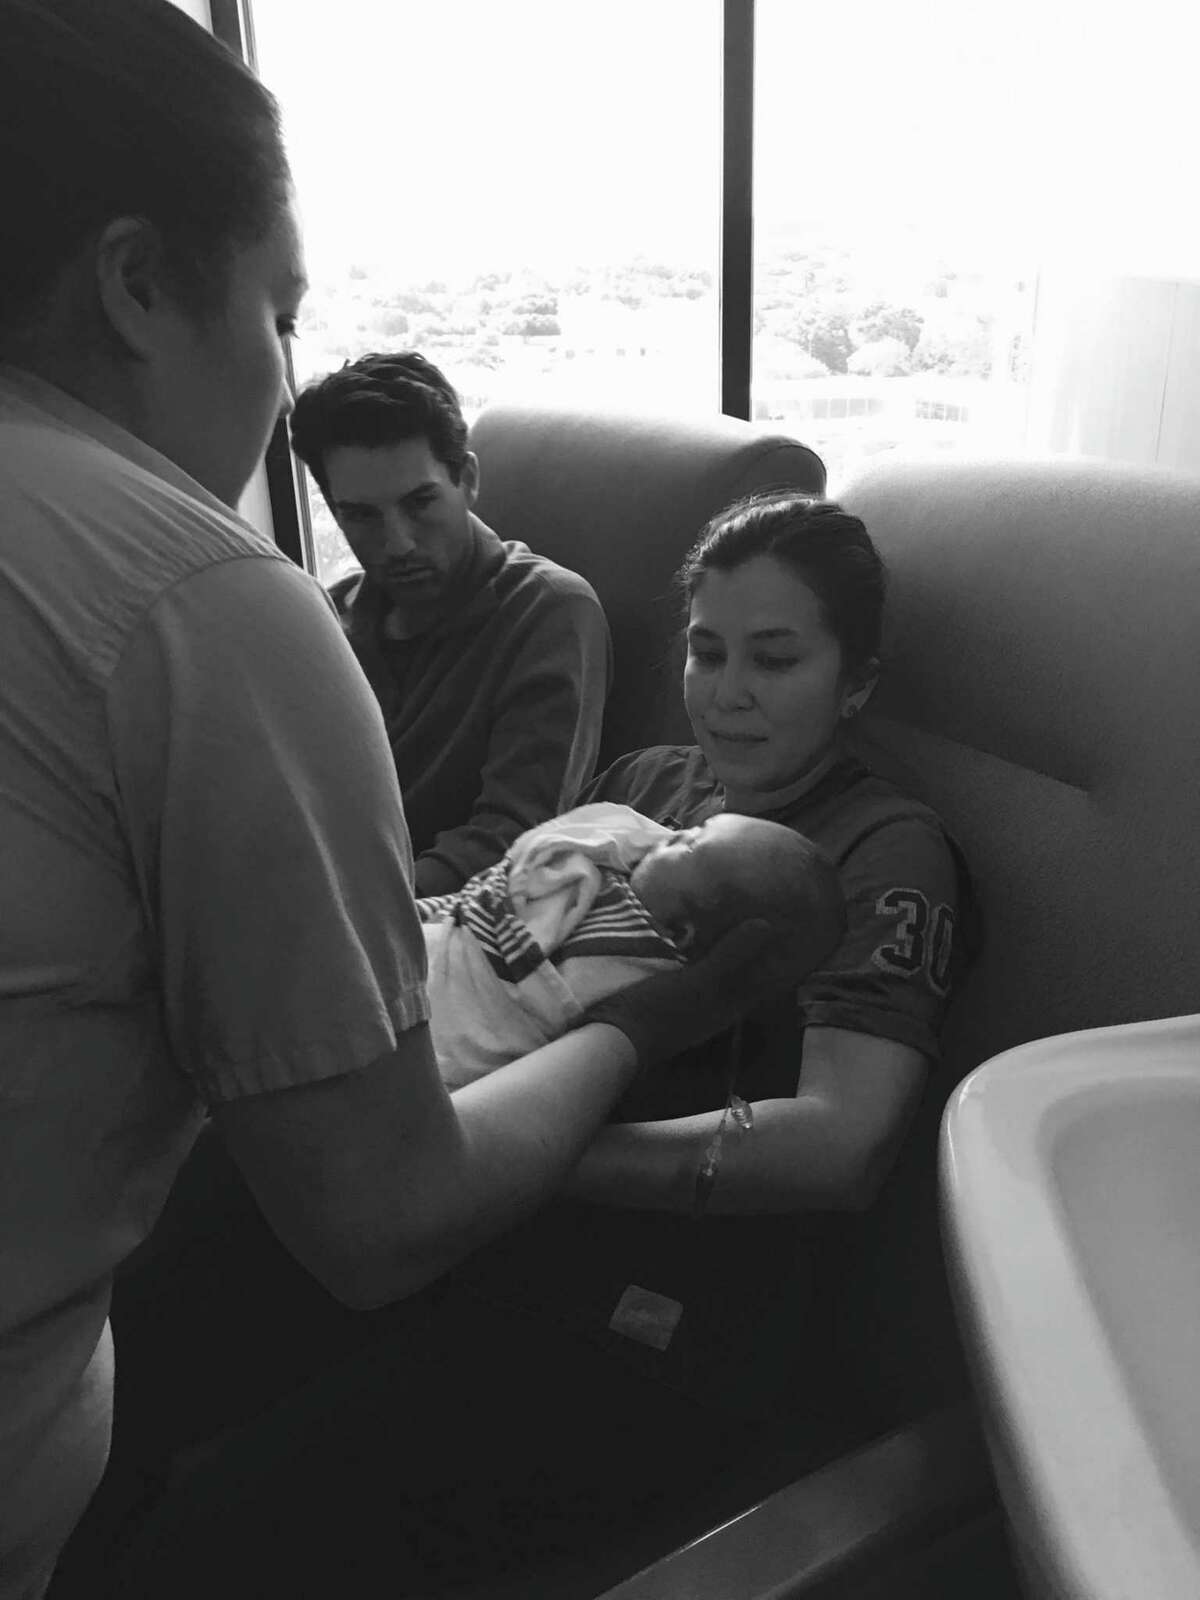 Vivian Graham holds her son, James, for the first time at North Central Baptist Hospital, as husband Braden Graham Sr. (center) looks on. James, who had a genetic mutation that prevented his limbs and chest from developing normally, died in her arms on Oct. 17, 2016, three days after his birth.